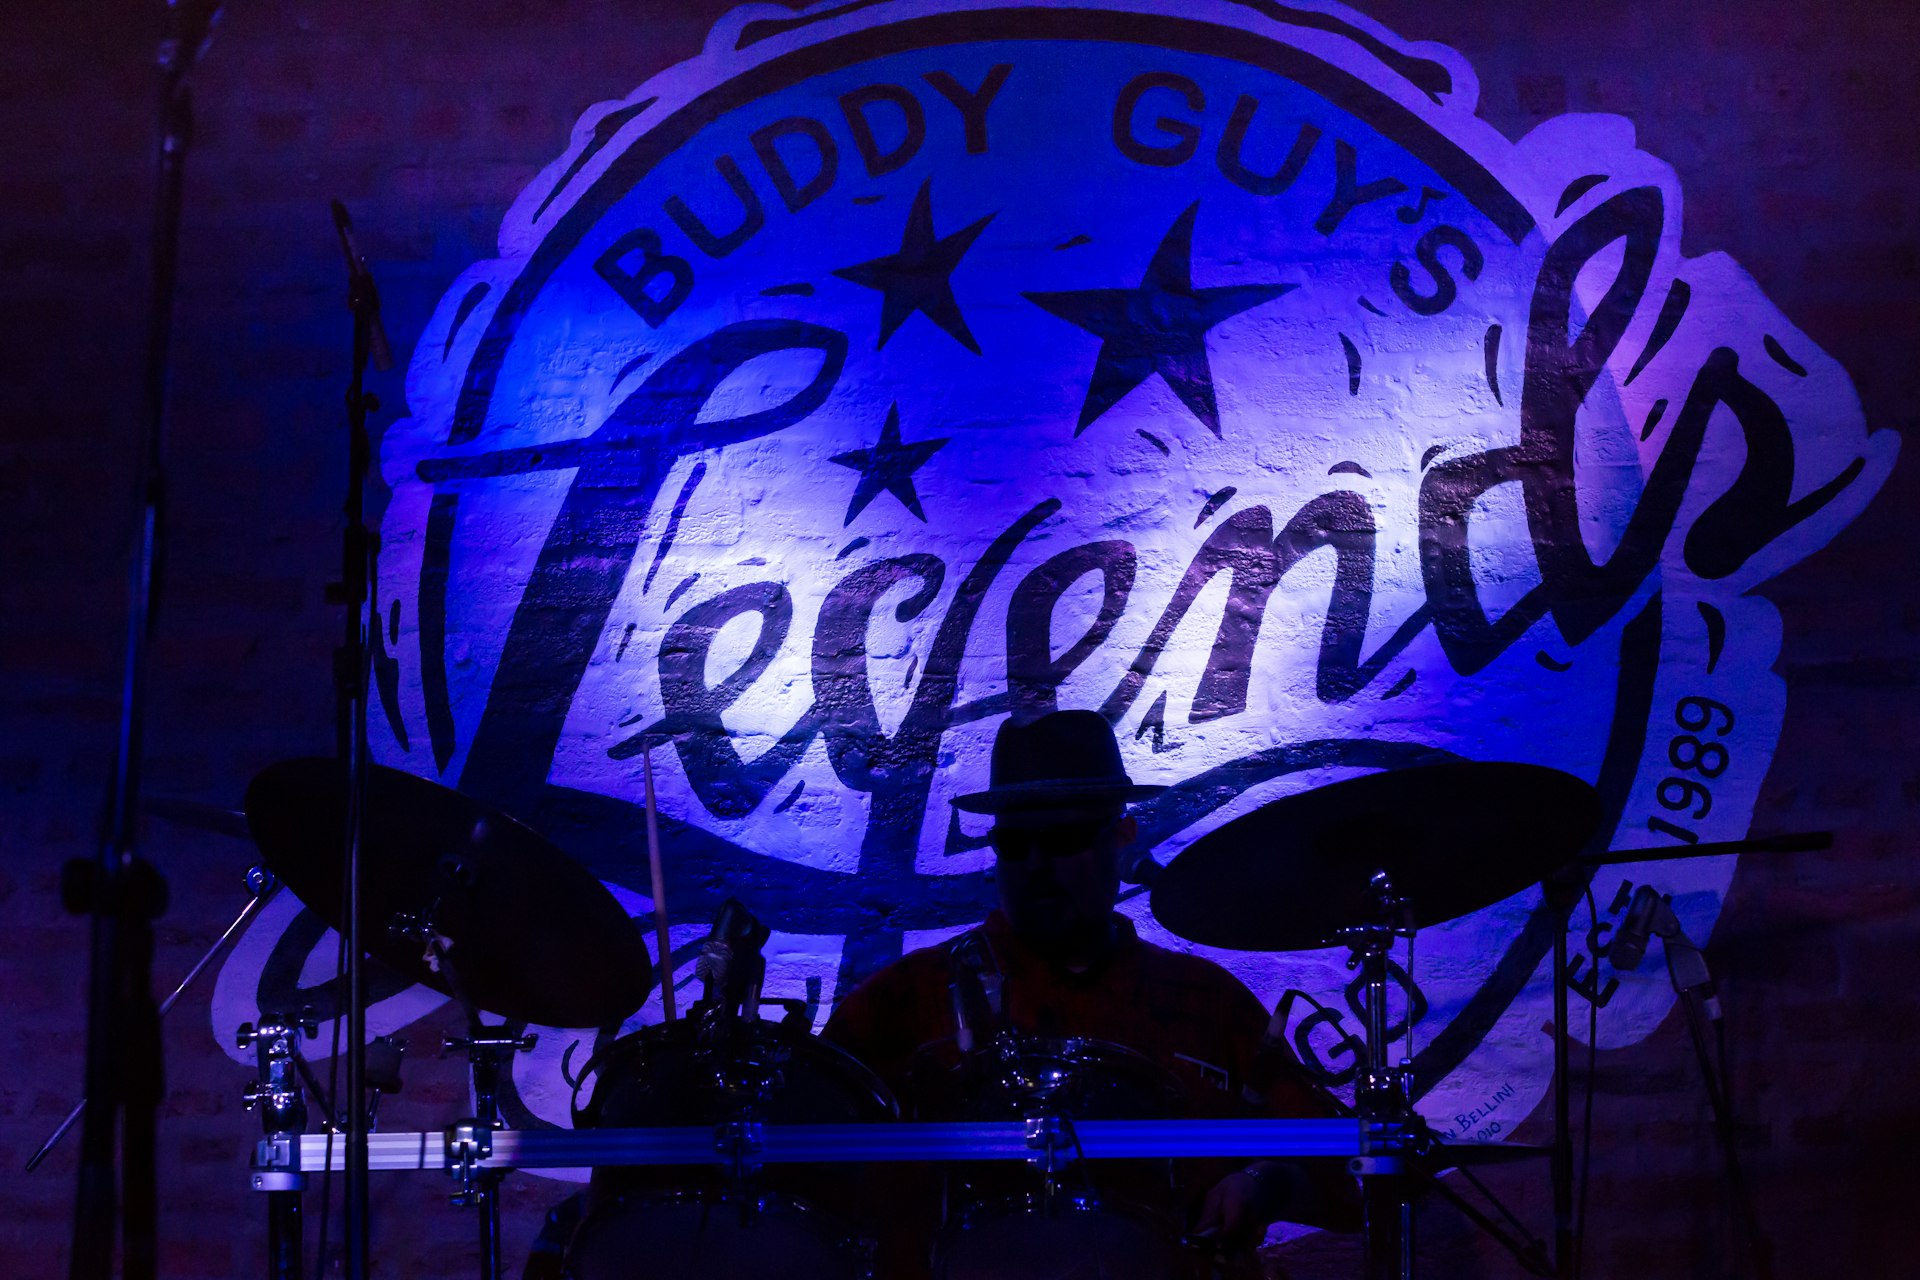 A drummer on stage at Buddy Guy's Legends jazz club in Chicago, Illinois